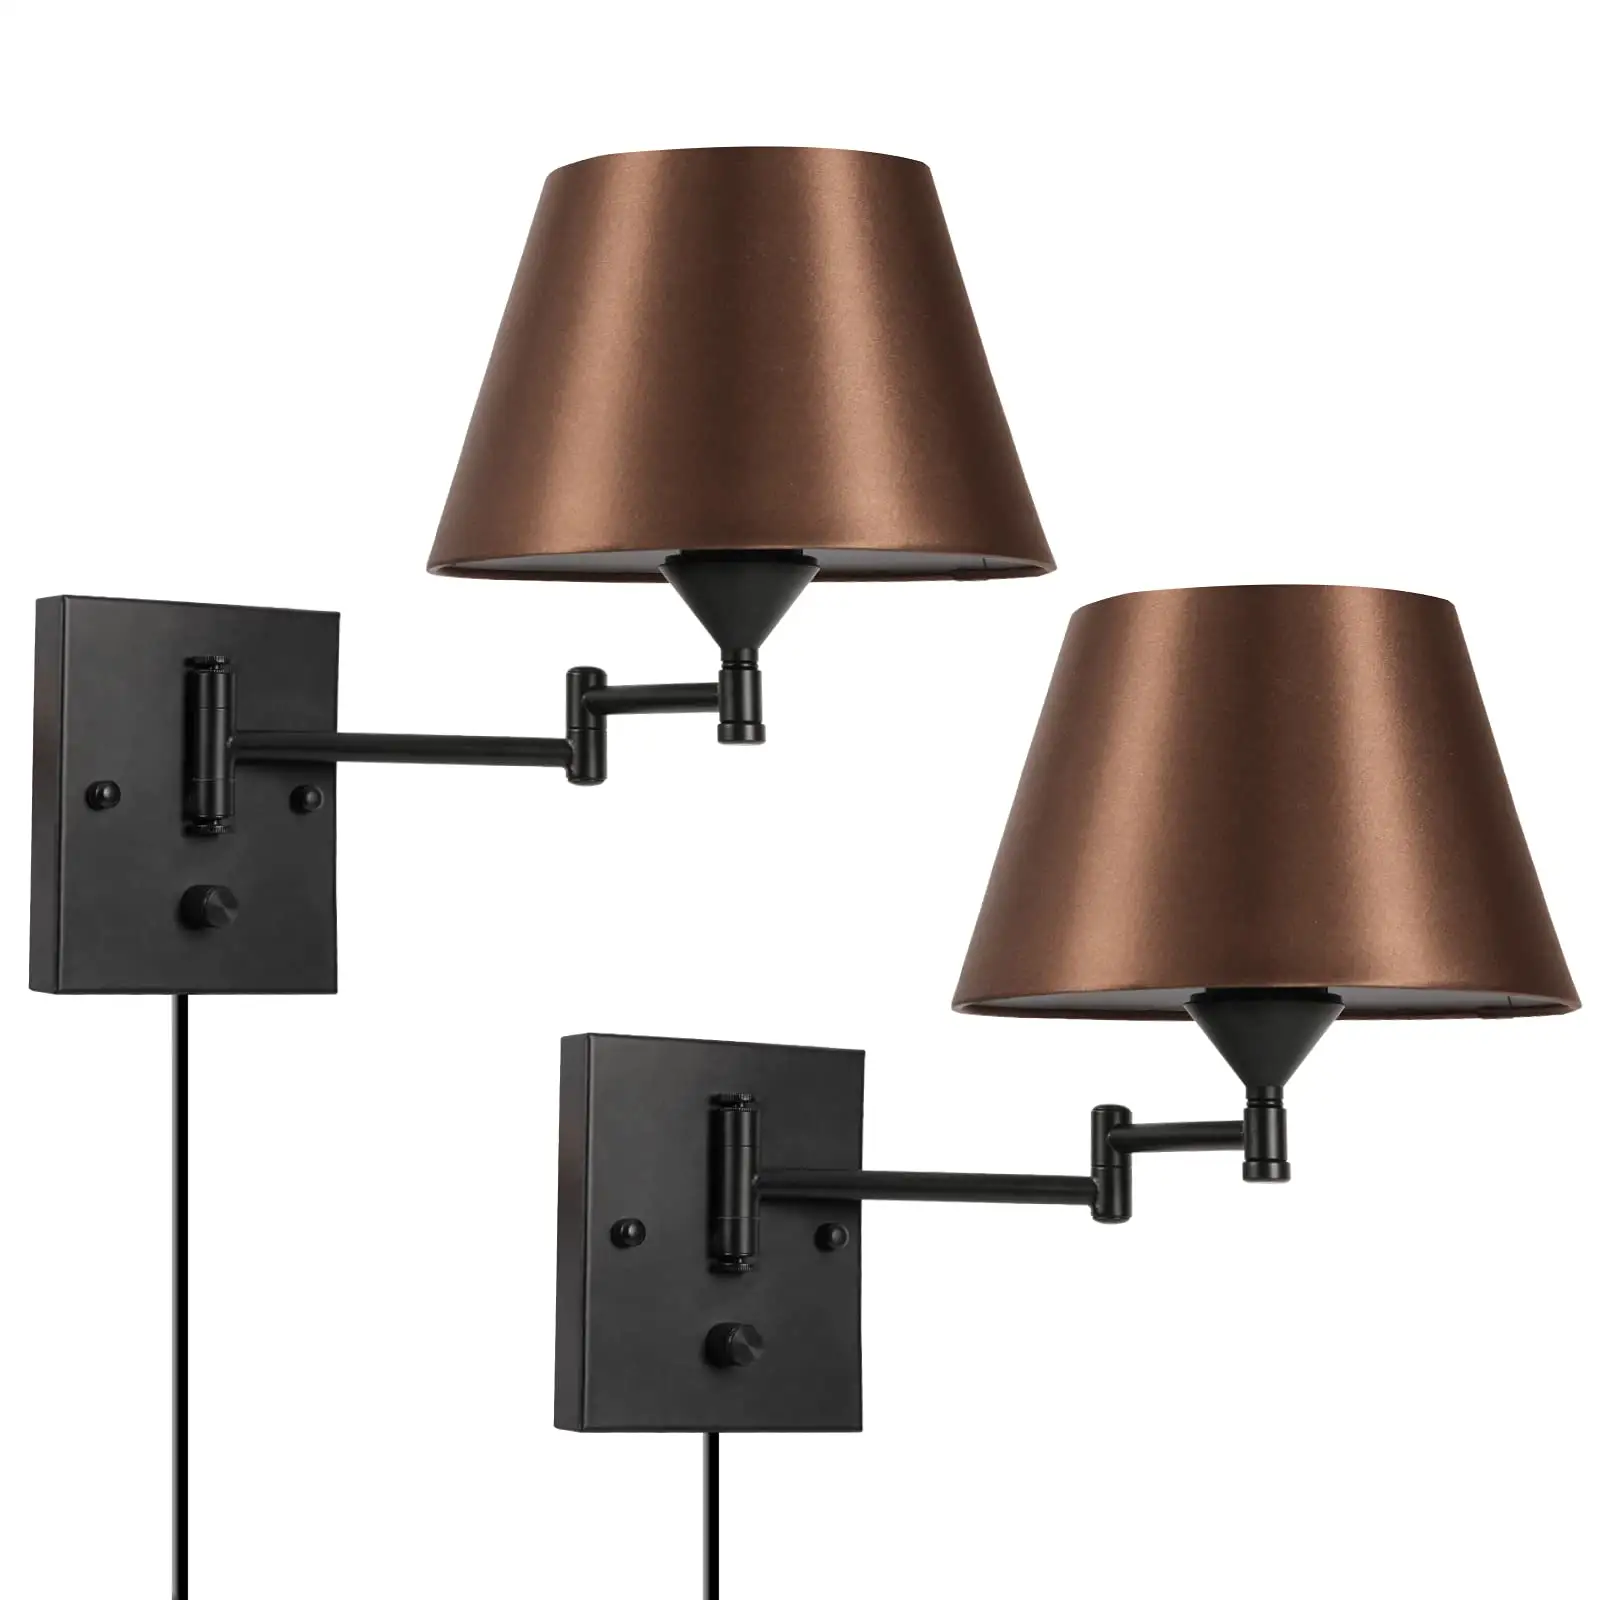 Plug in Wall Sconce Set of 2 Swing Arm Wall Lamp with Plug in Cord and Fabric Shade Wall Light Fixtures for Hallway Bedroom